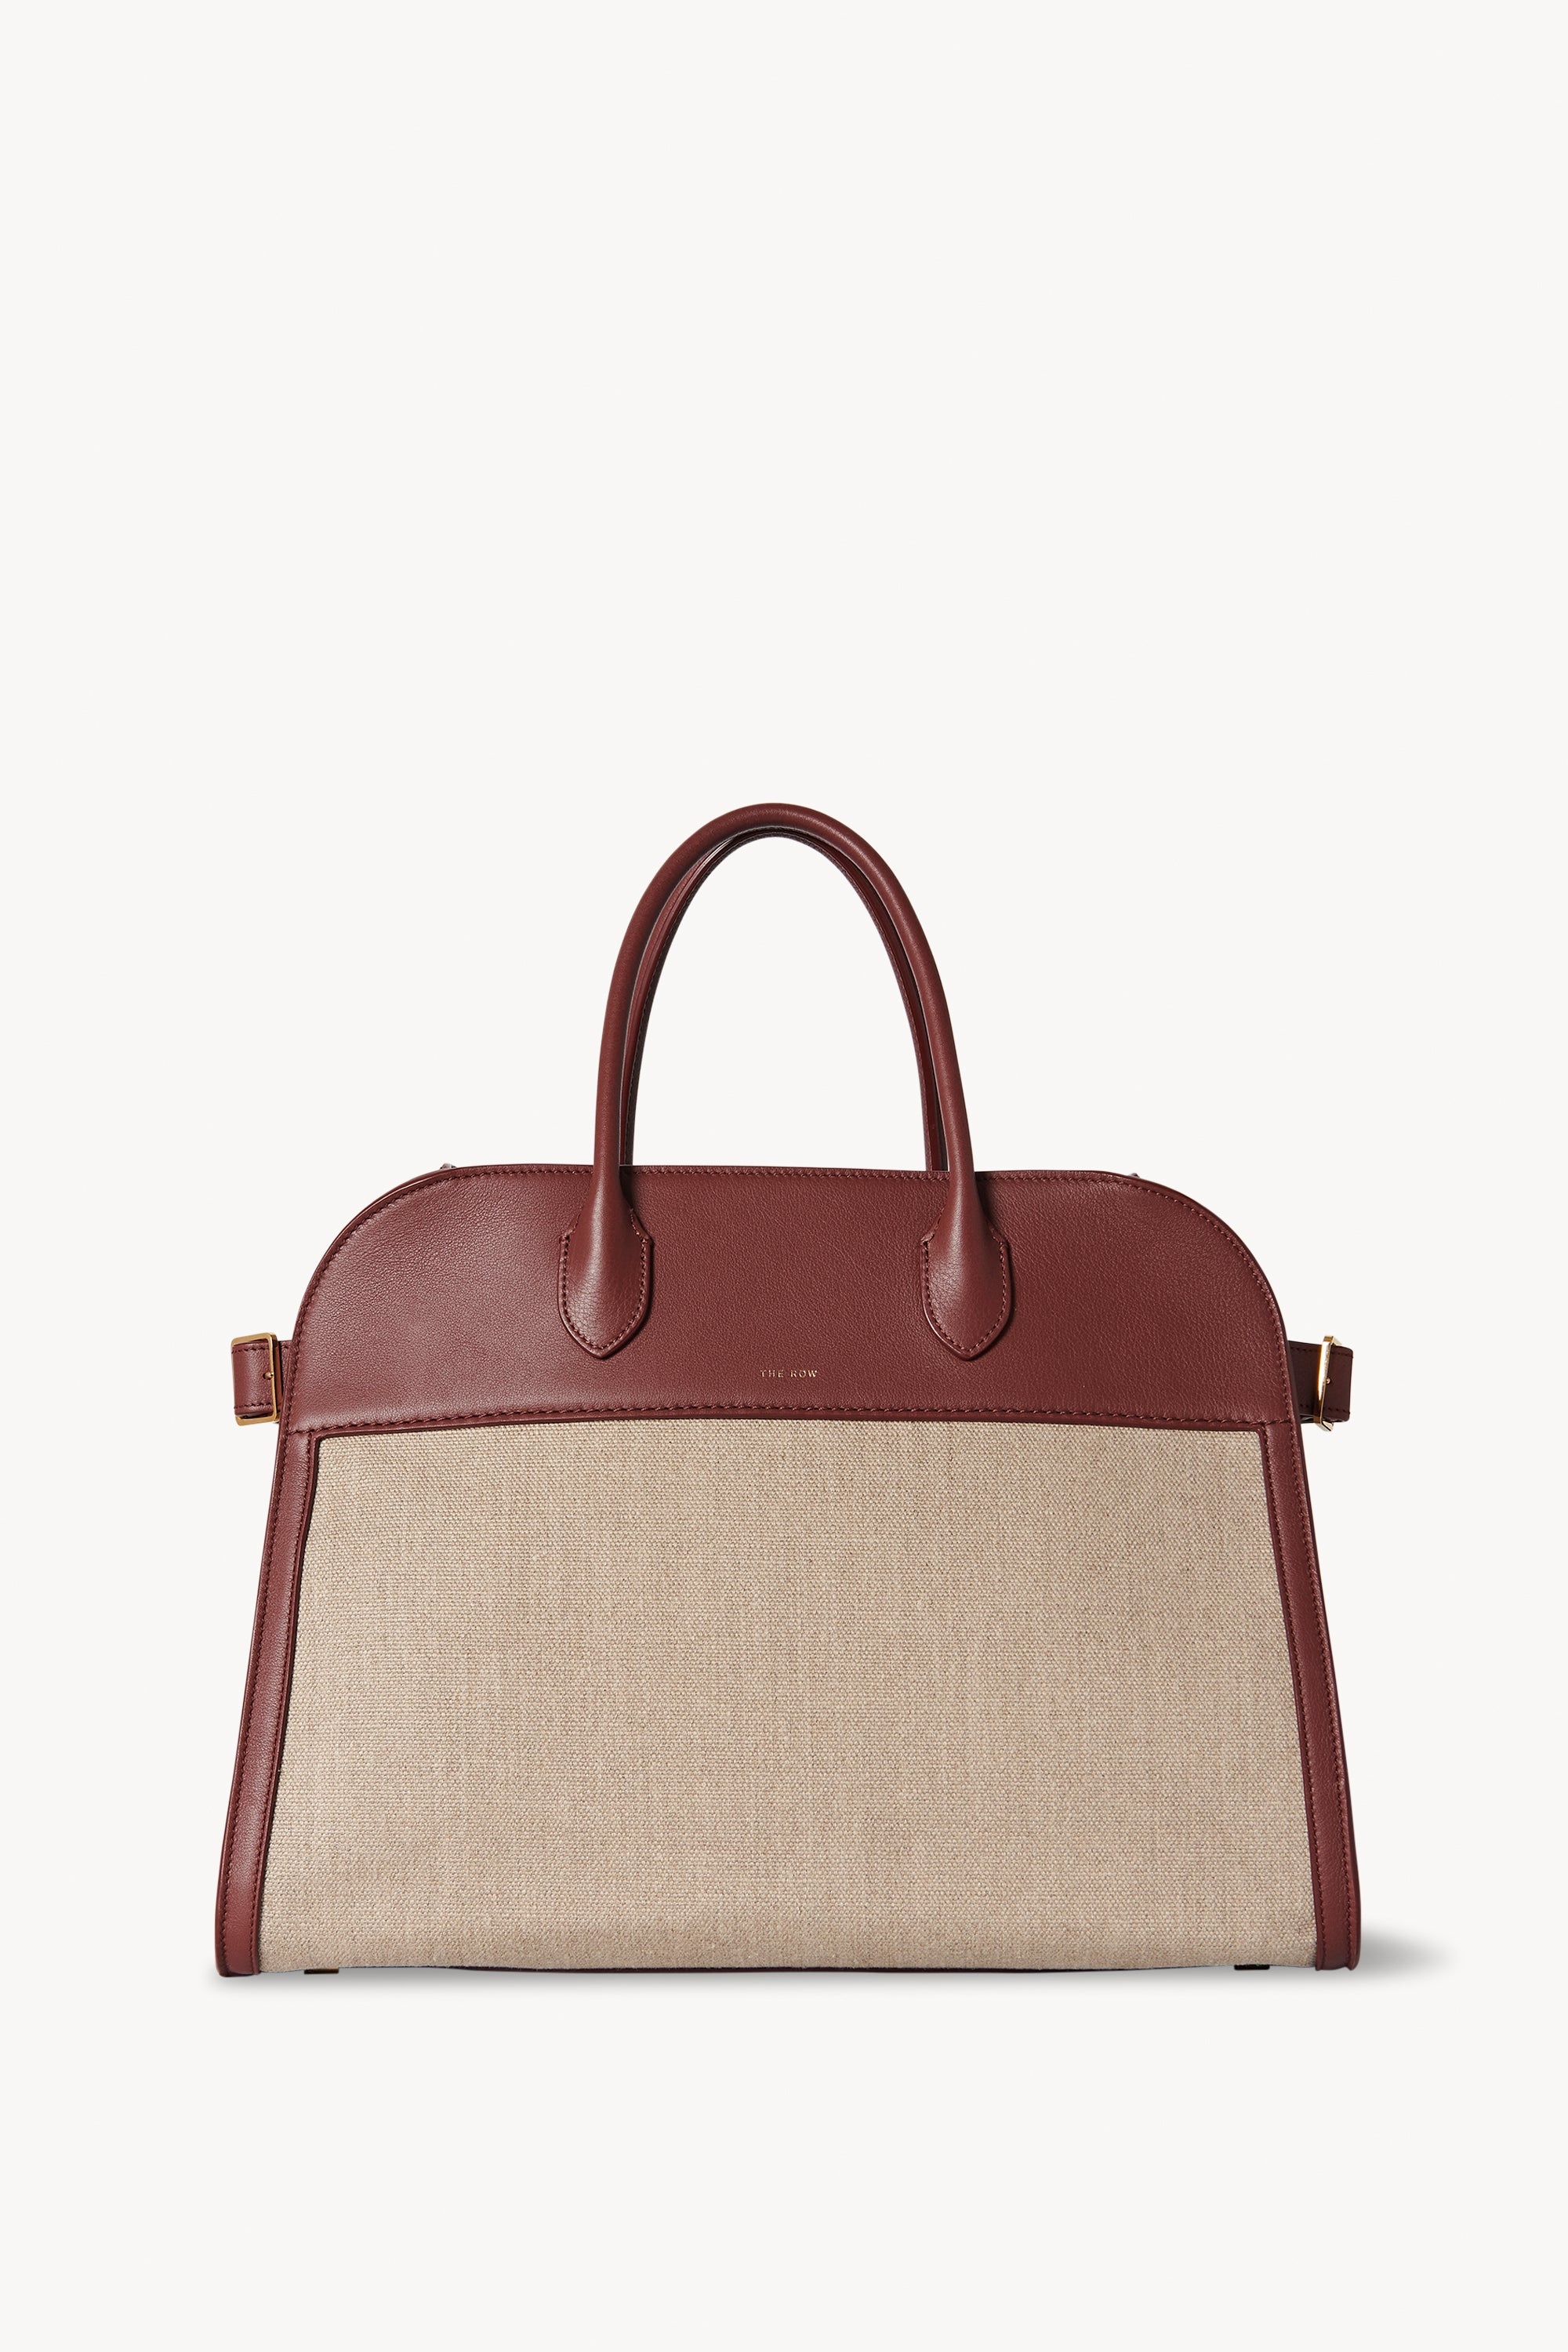 The Row Soft Margaux 15 Bag in Canvas and Leather | REVERSIBLE